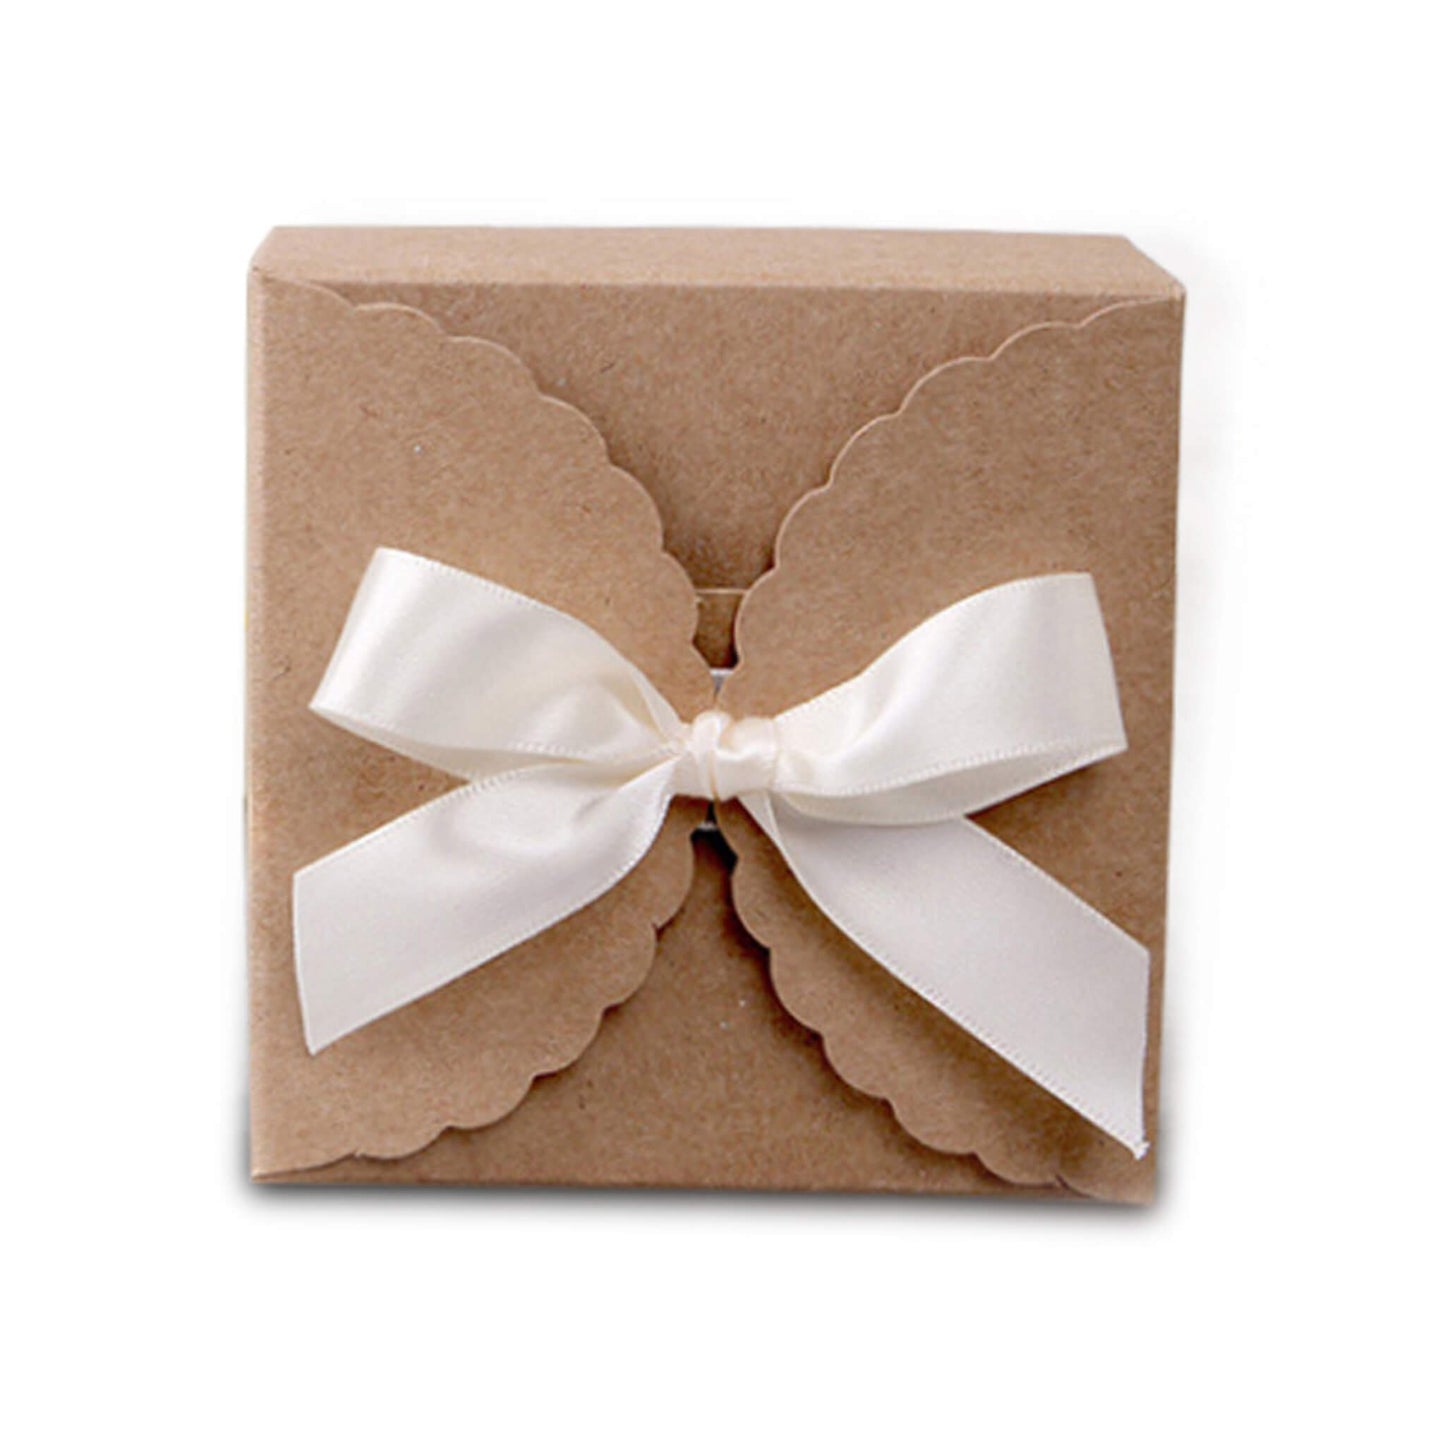 Baking candy handmade soap square gift paper box